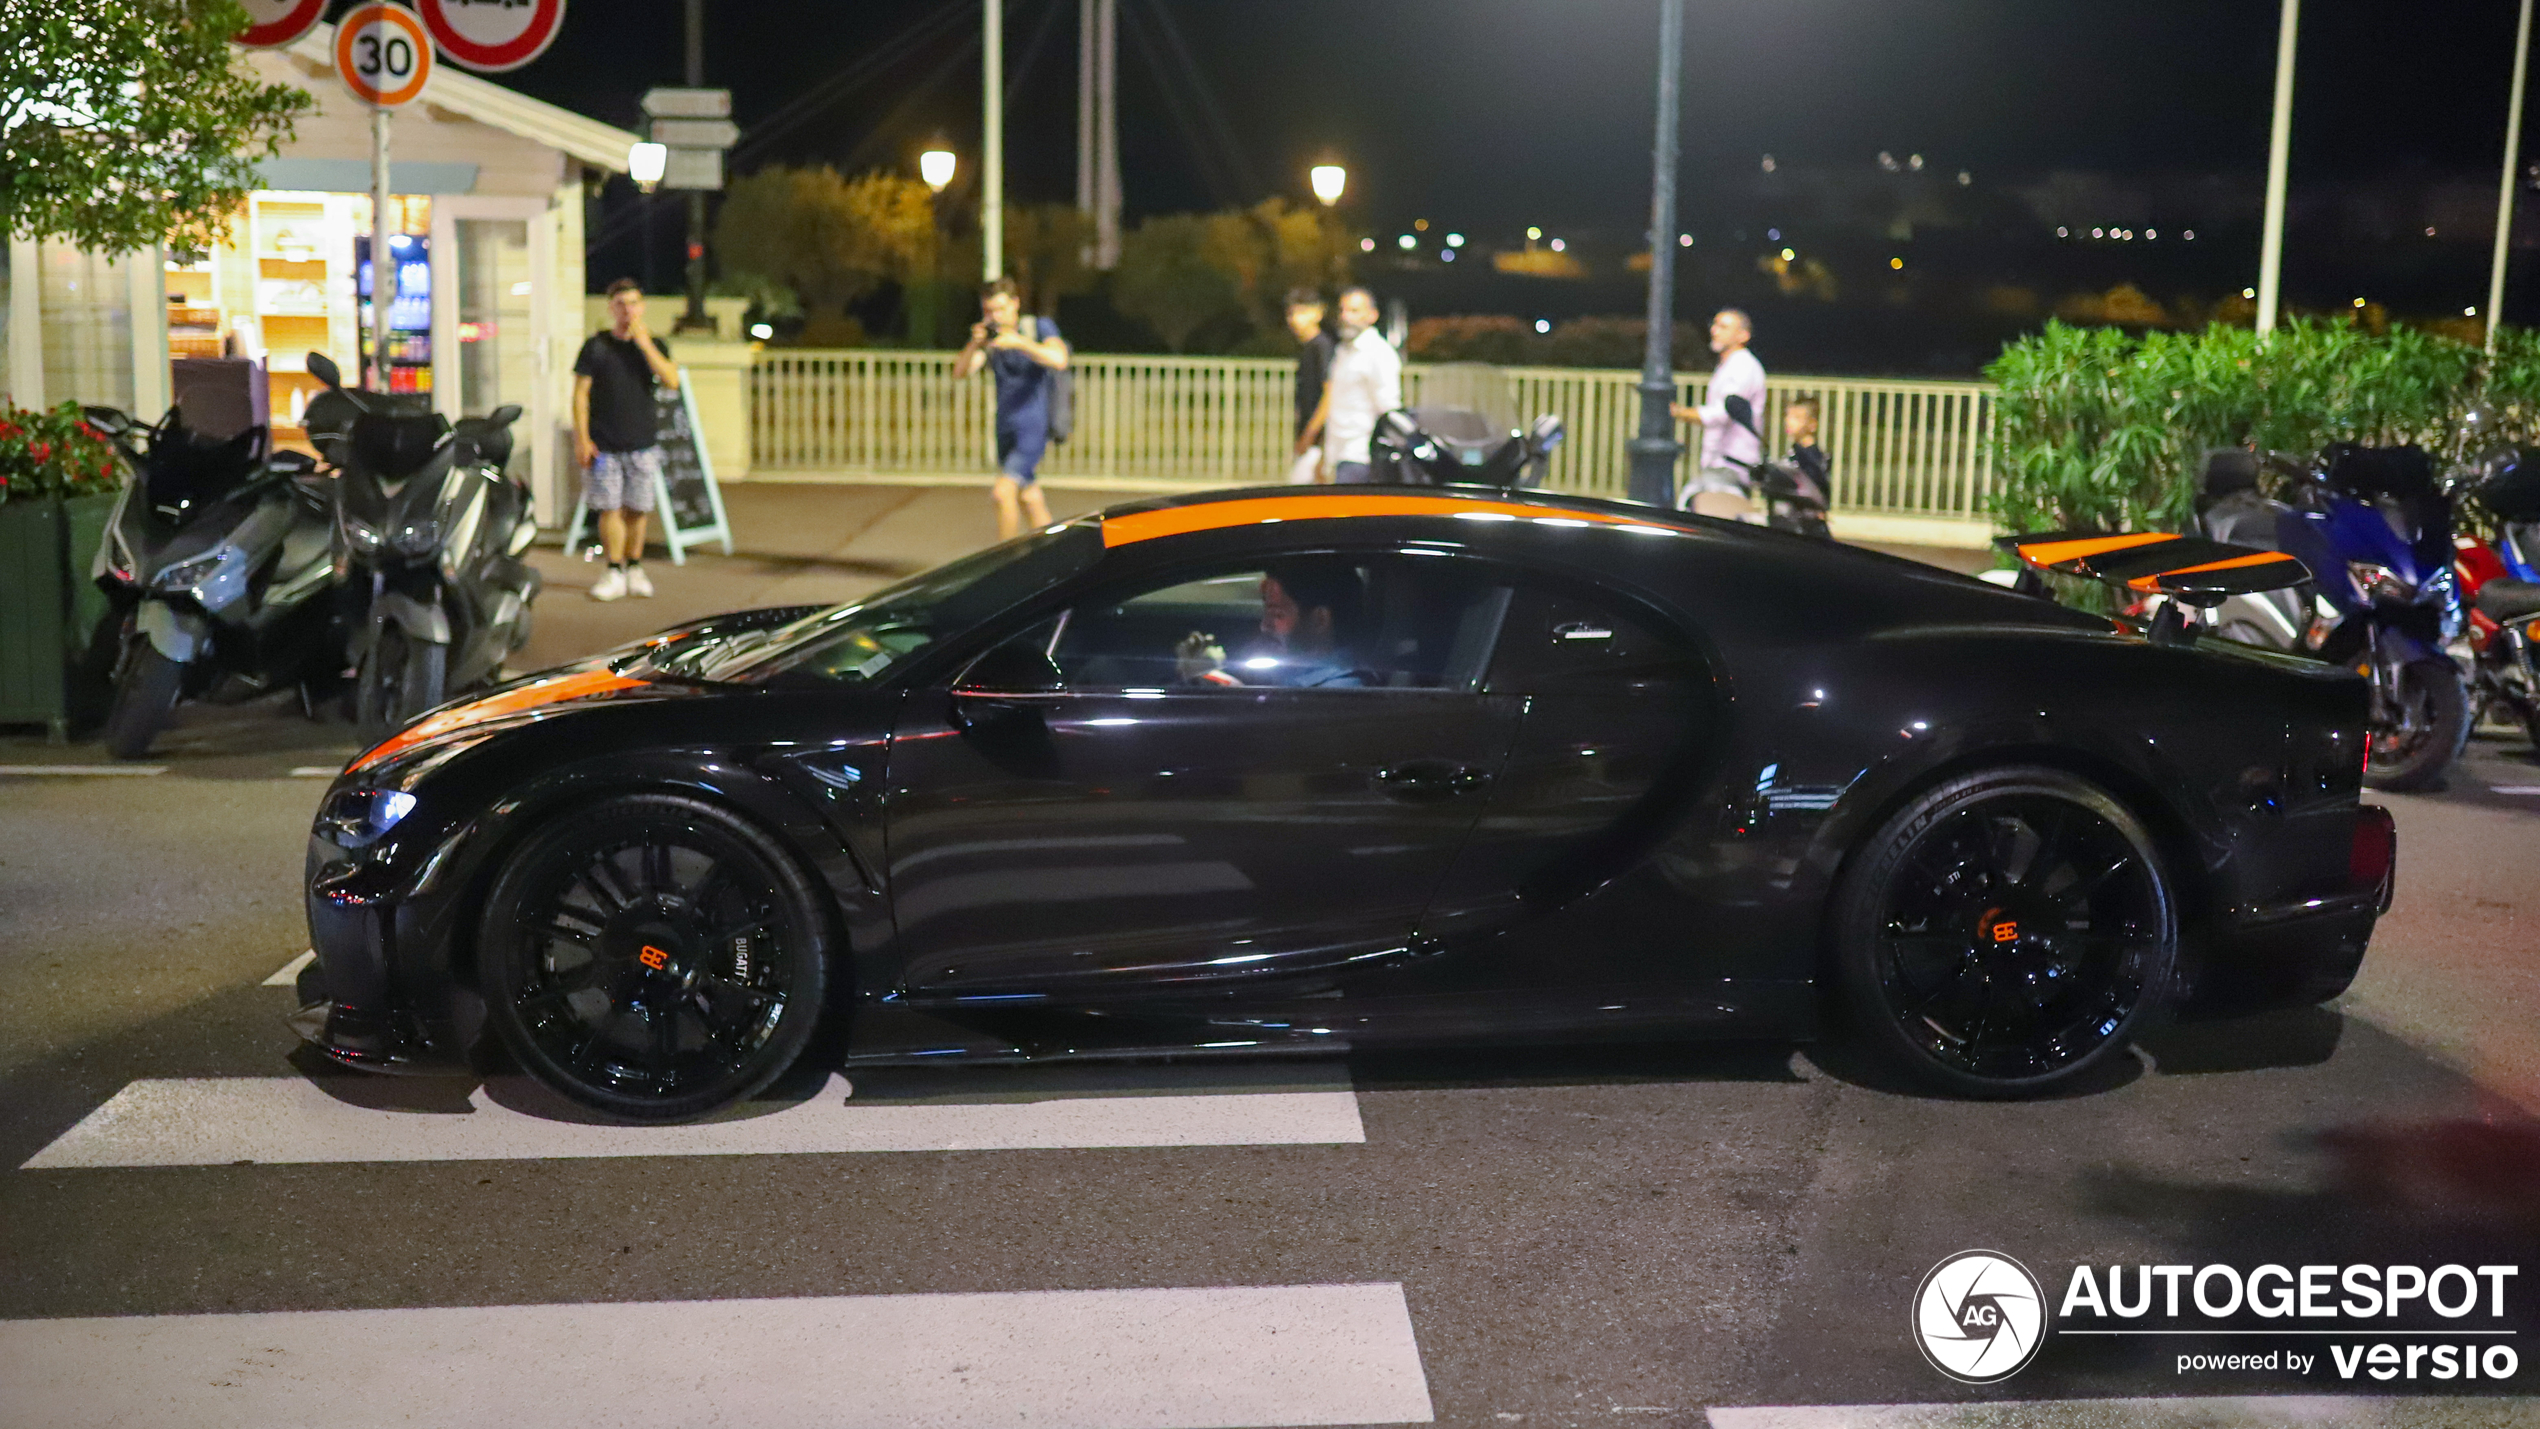 As soon as it gets dark in monaco, there will see new bugattis